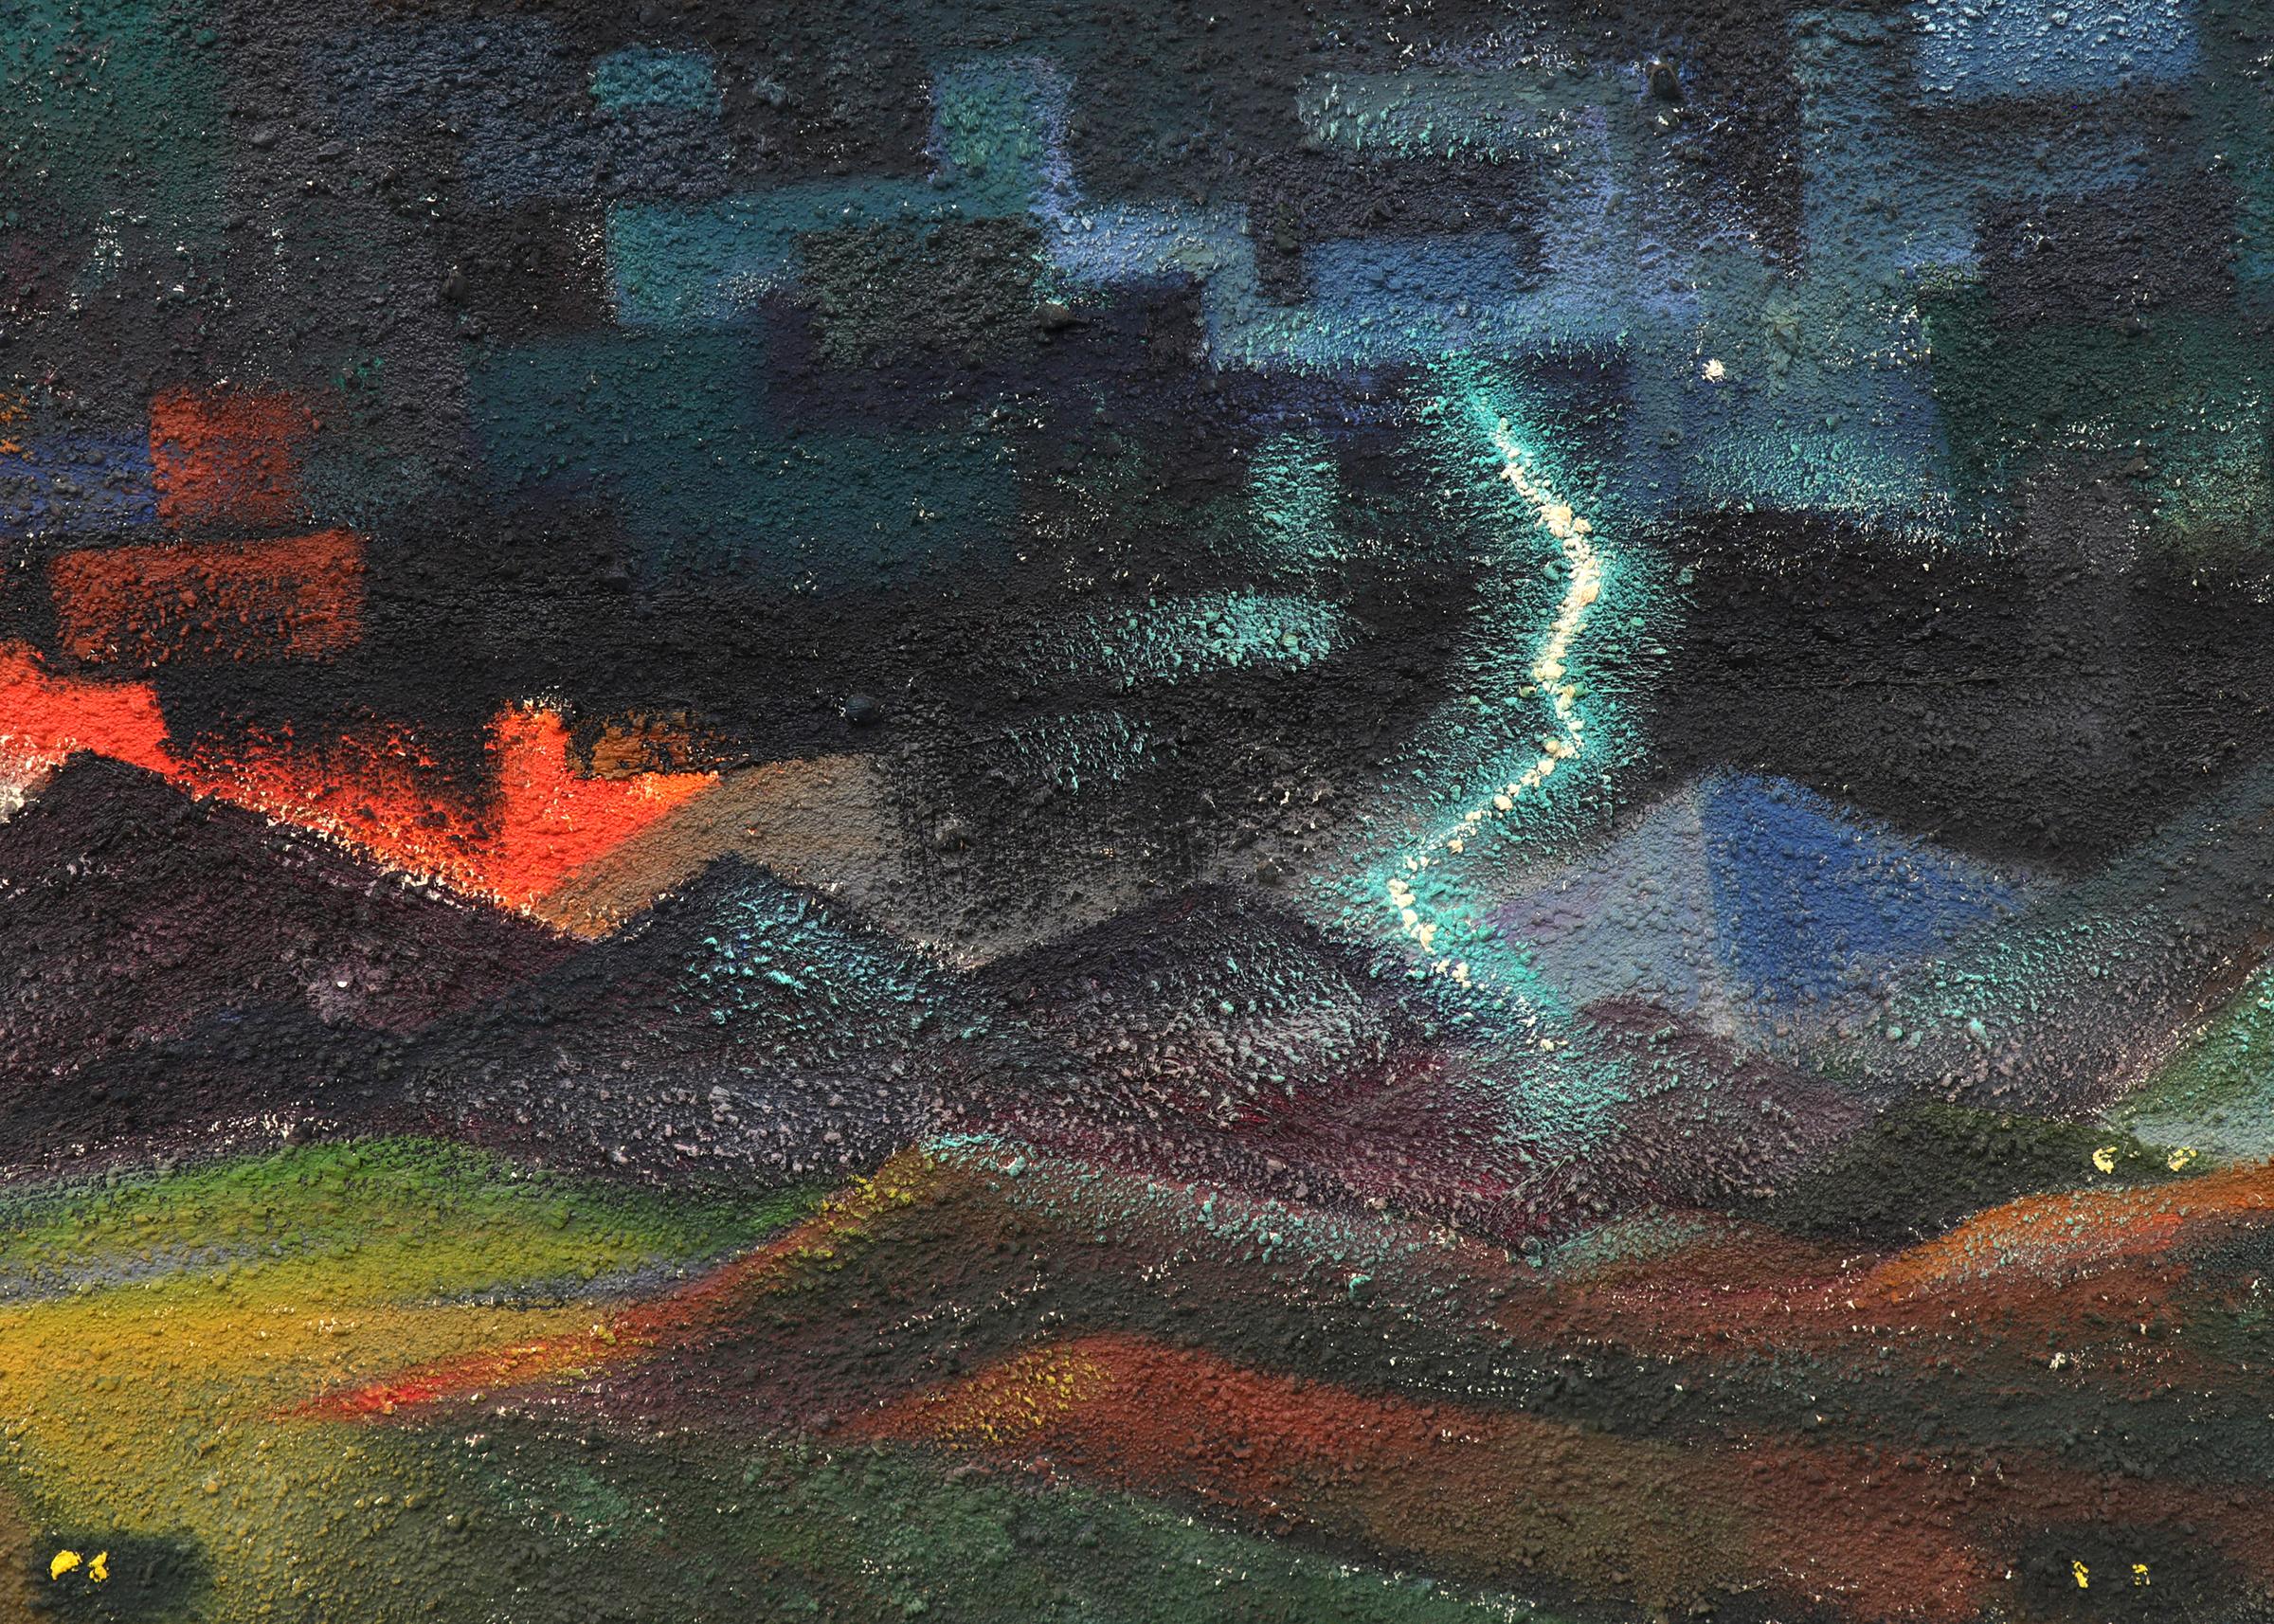 Original vintage painting of a Lightning Storm, Southwestern Mountain Landcape. Oil painting on textured board by Morton Lawrence Schneider (1919-2000). This large scale semi abstract artwork in horizontal format depicts an abstract southwestern